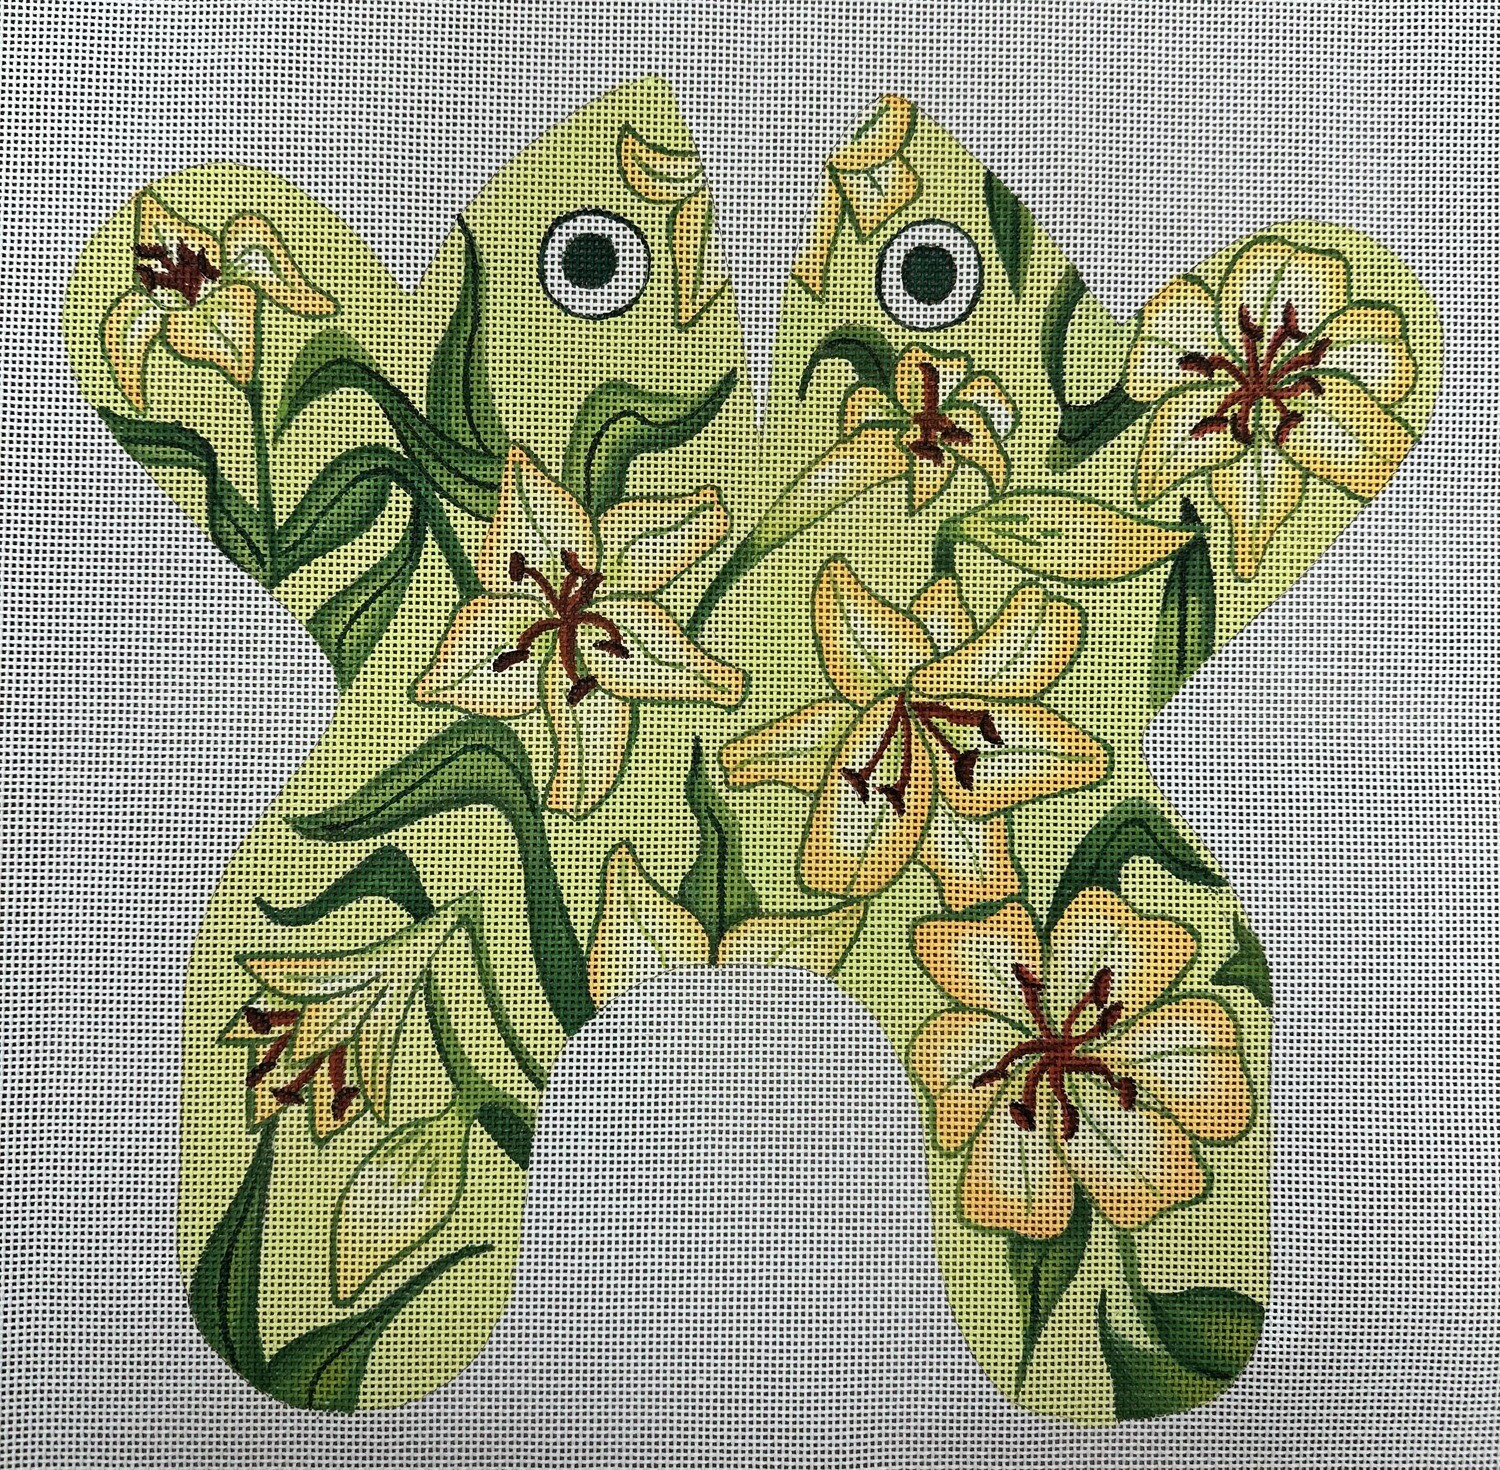 Large Daffodil 3D Frog (Handpainted by C. Lewis